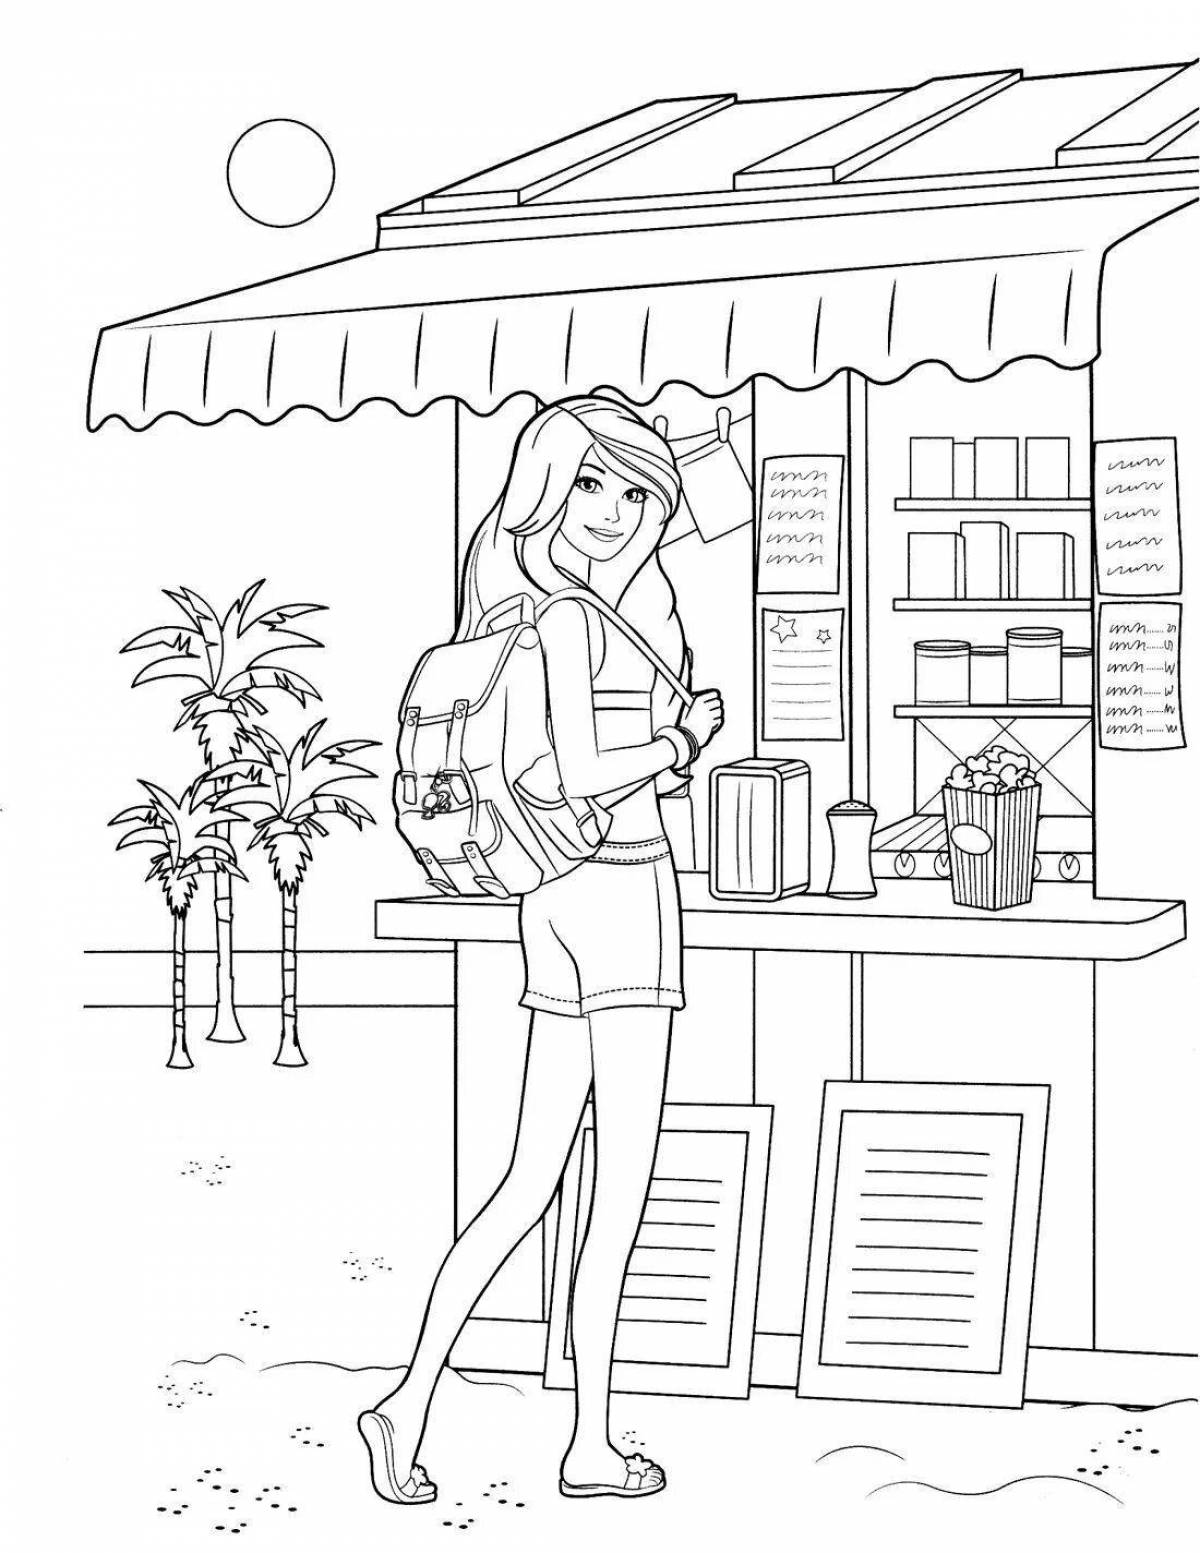 Colorful barbie on the beach coloring page